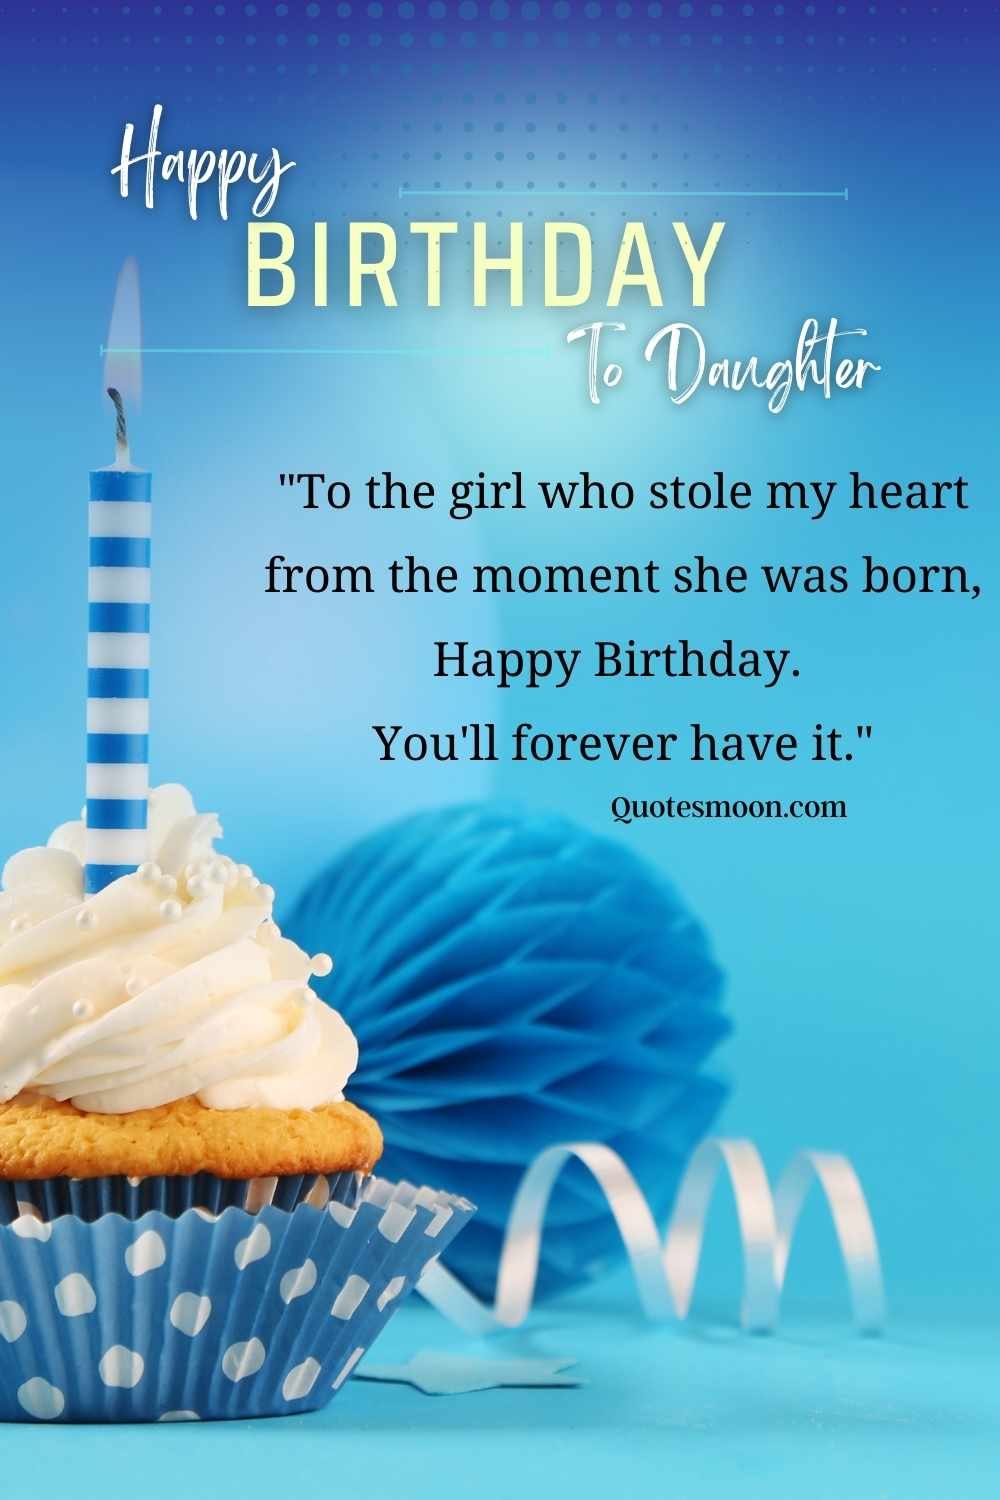 Happy Birthday Quotes For Daughter images HD